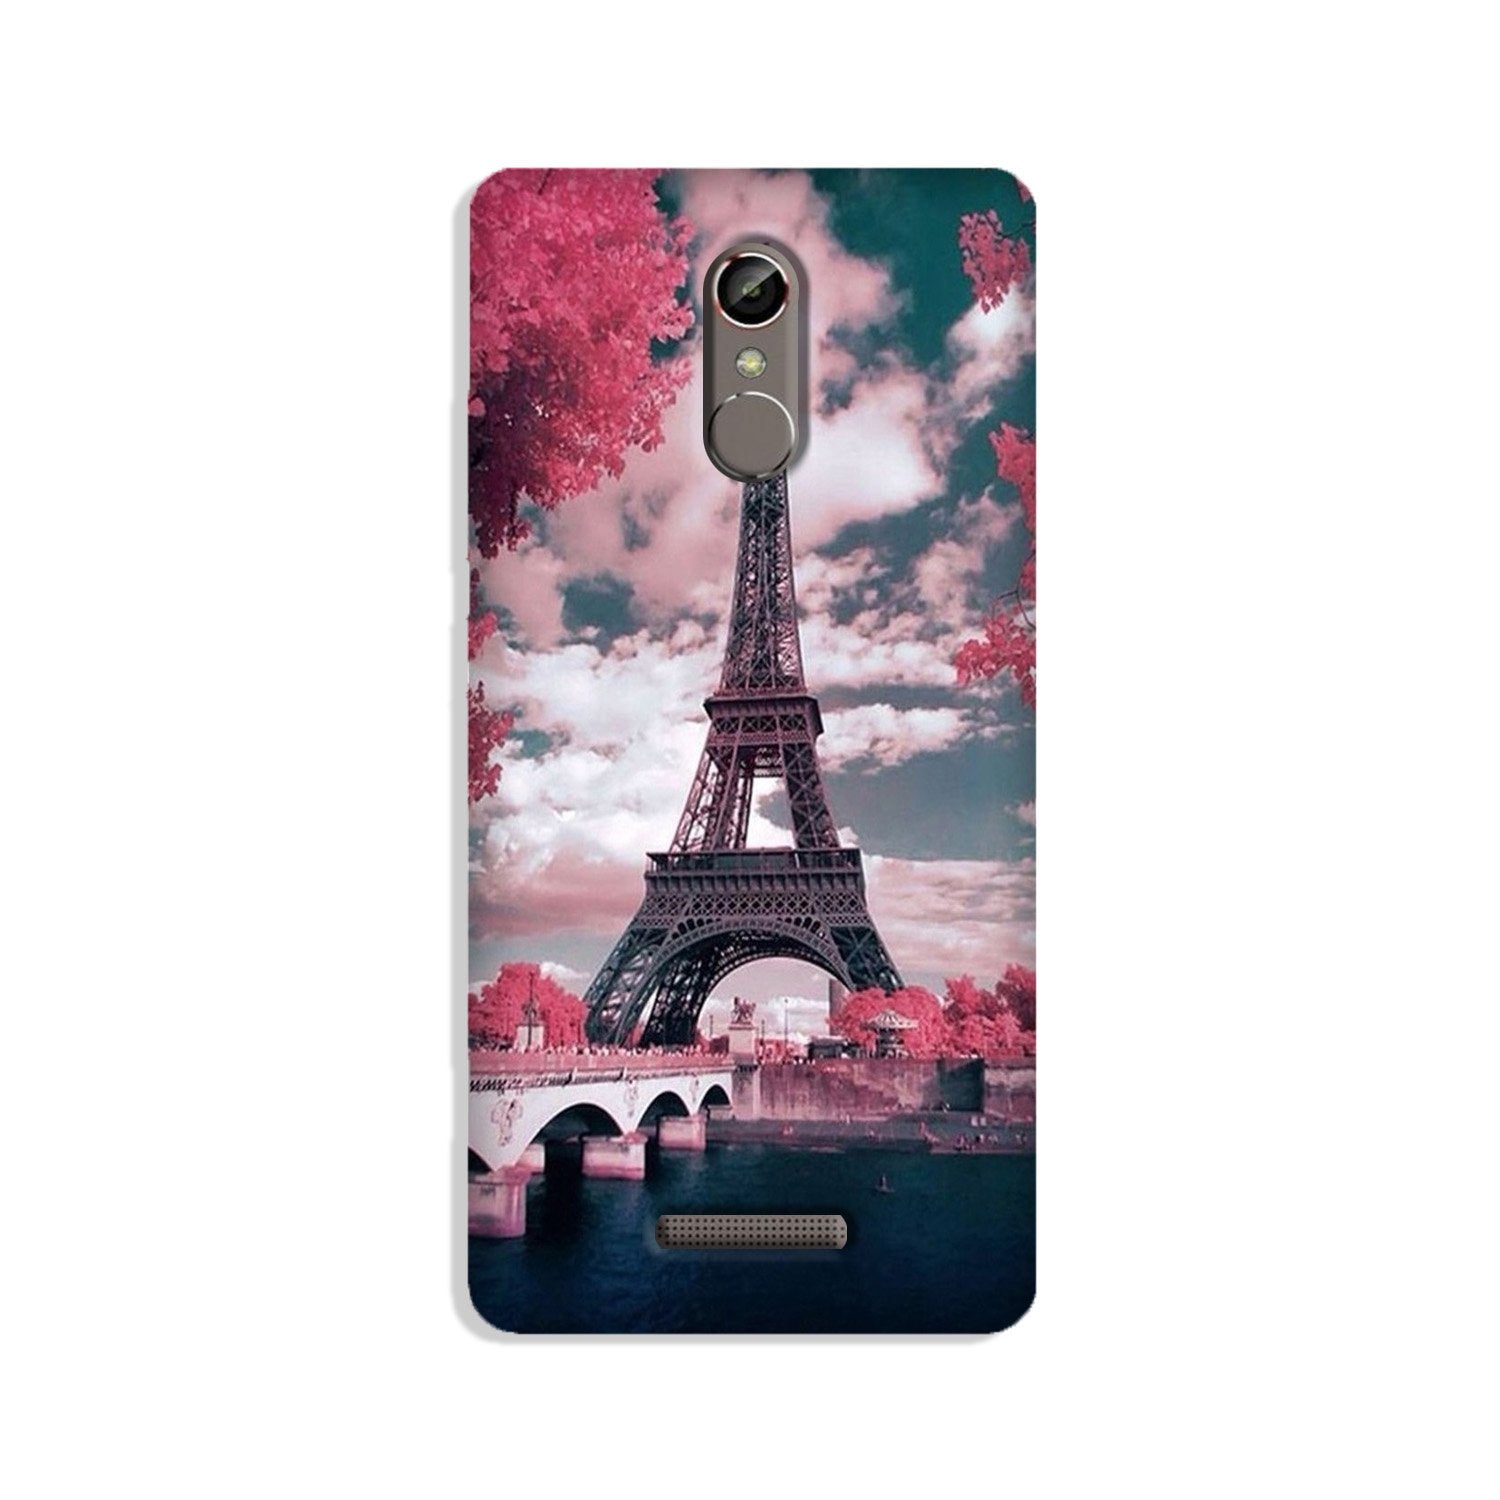 Eiffel Tower Case for Gionee S6s(Design - 101)